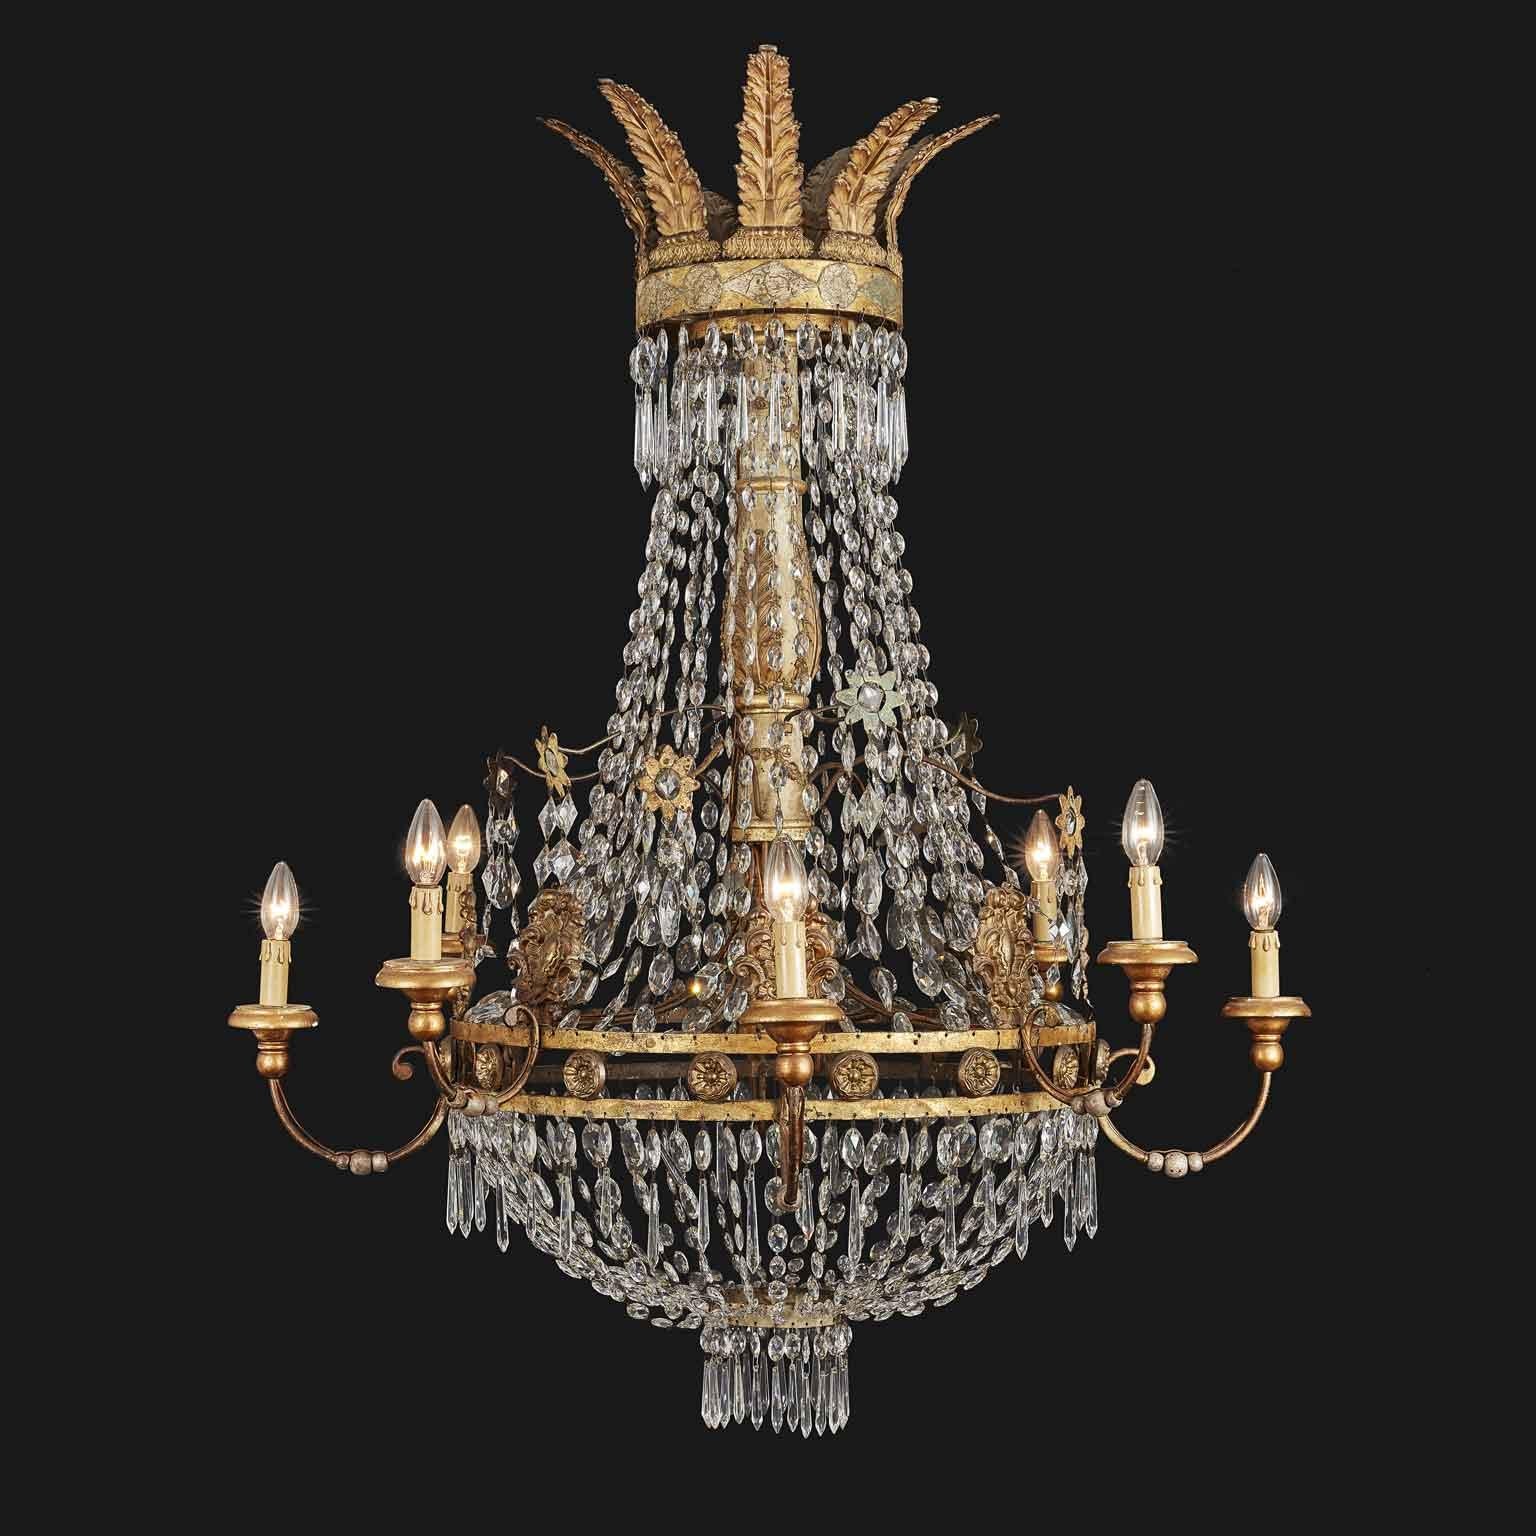 Magnificent antique Empire crystal and gilt iron chandelier, featuring two tiers supporting eight arms and hand-carved giltwood baluster stem, fully hand-made in the late 18th century of Italian origin, coming from an antiquarian in Lucca,